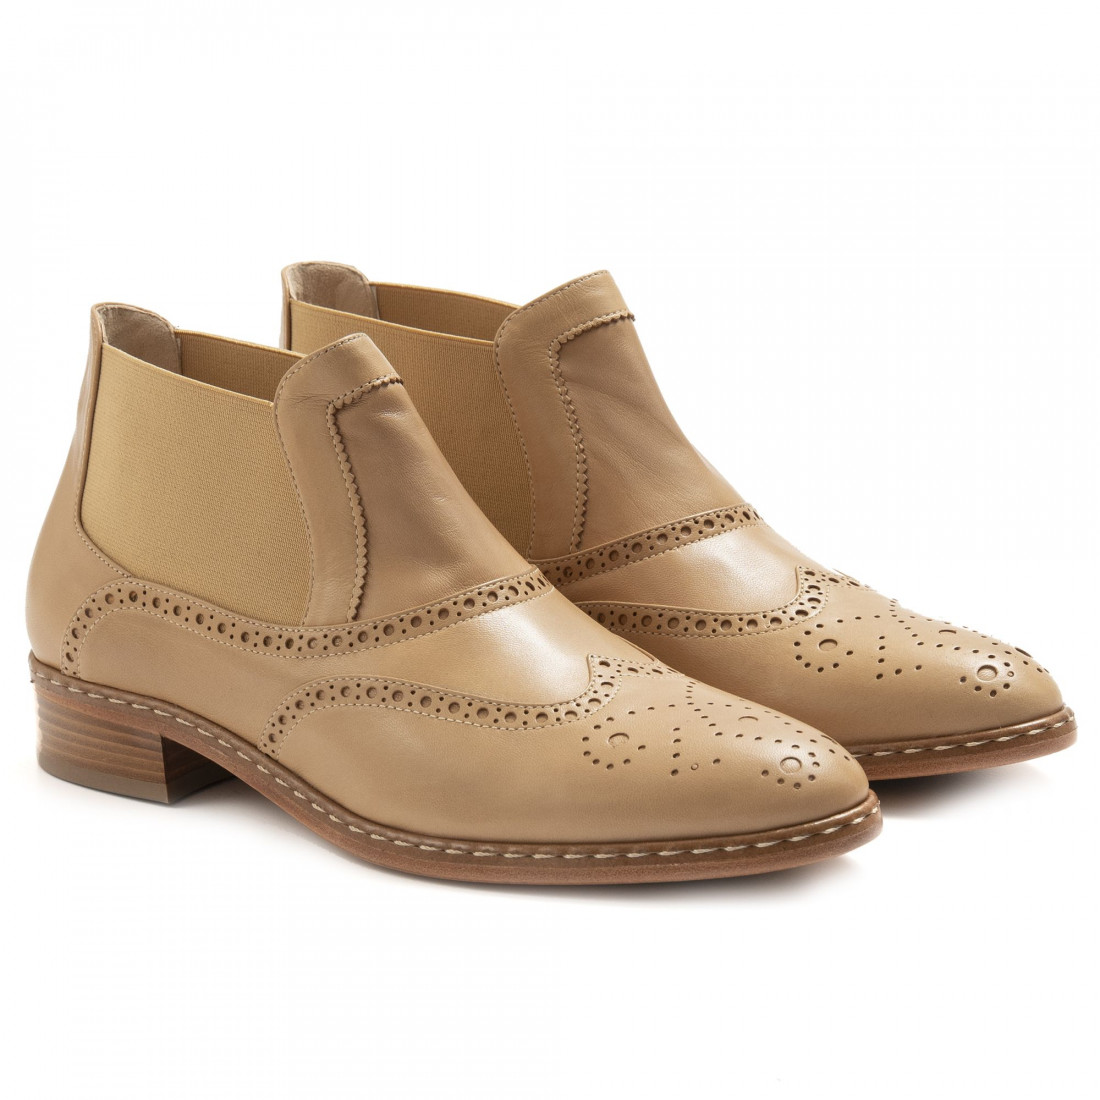 Light brown Lorenzo Masiero ankle boots in soft leather